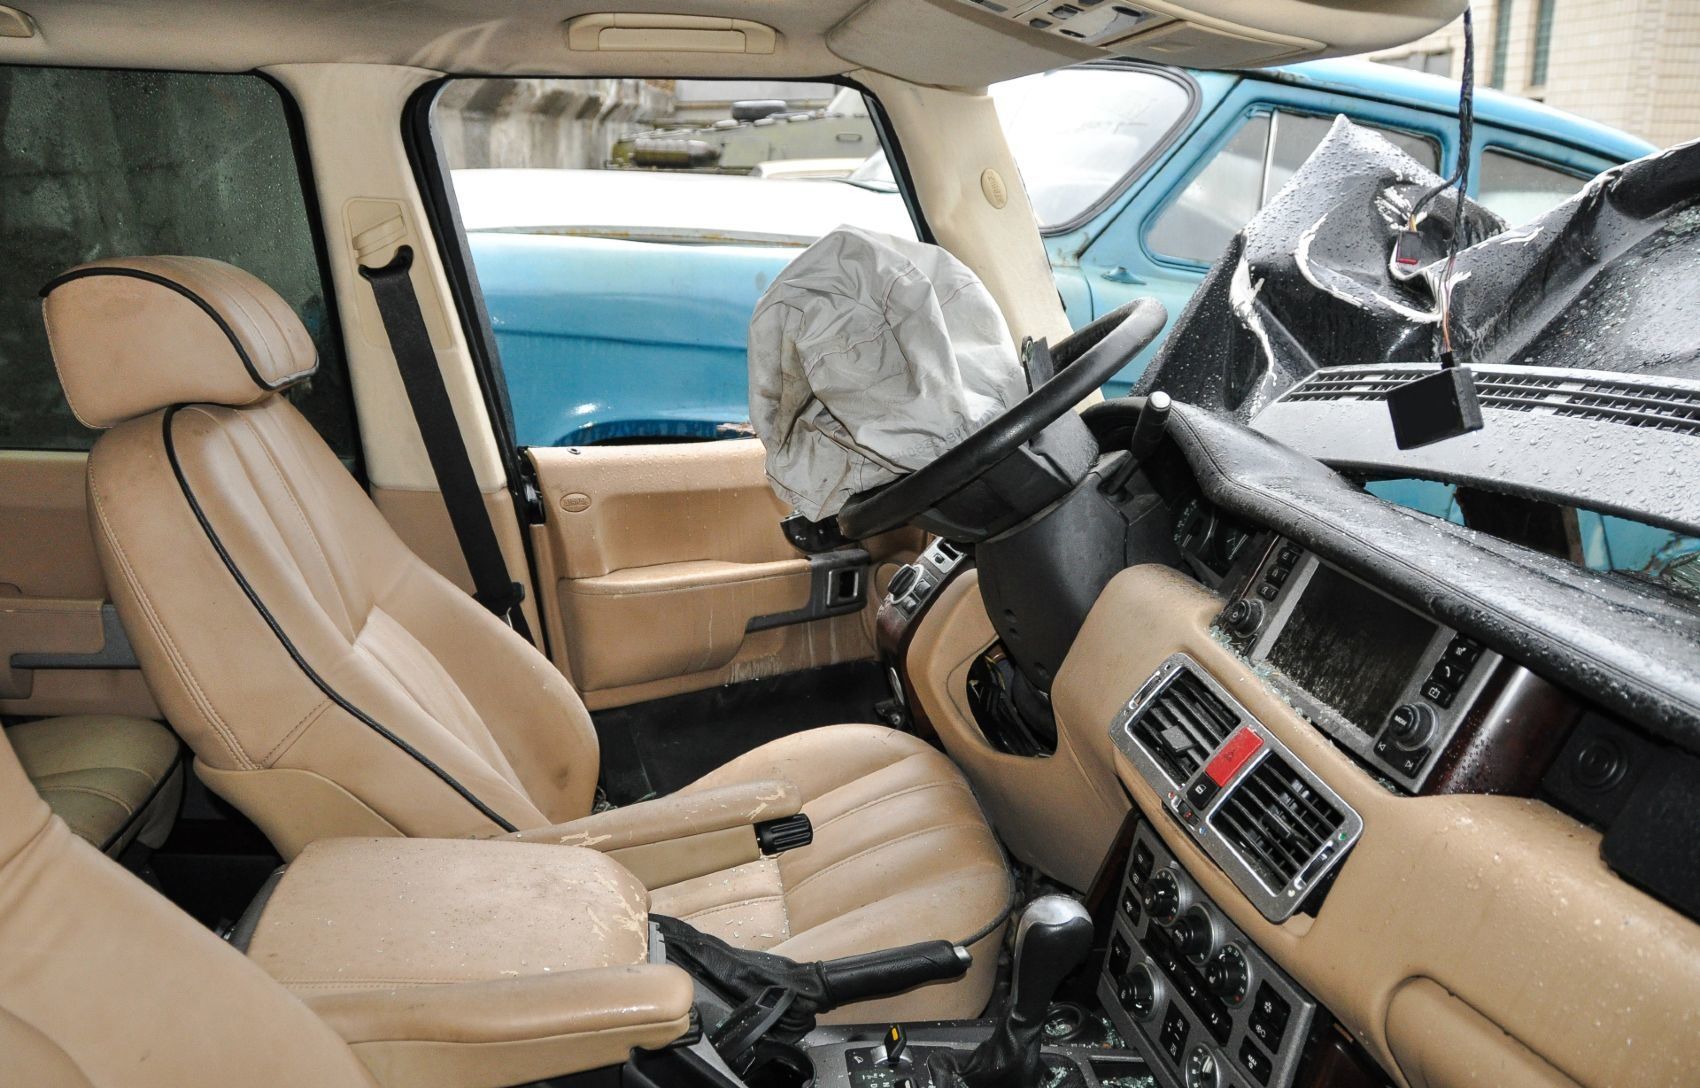 The interior of a car is seen after an accident. The driver's-side airbag has been deployed - takata airbag